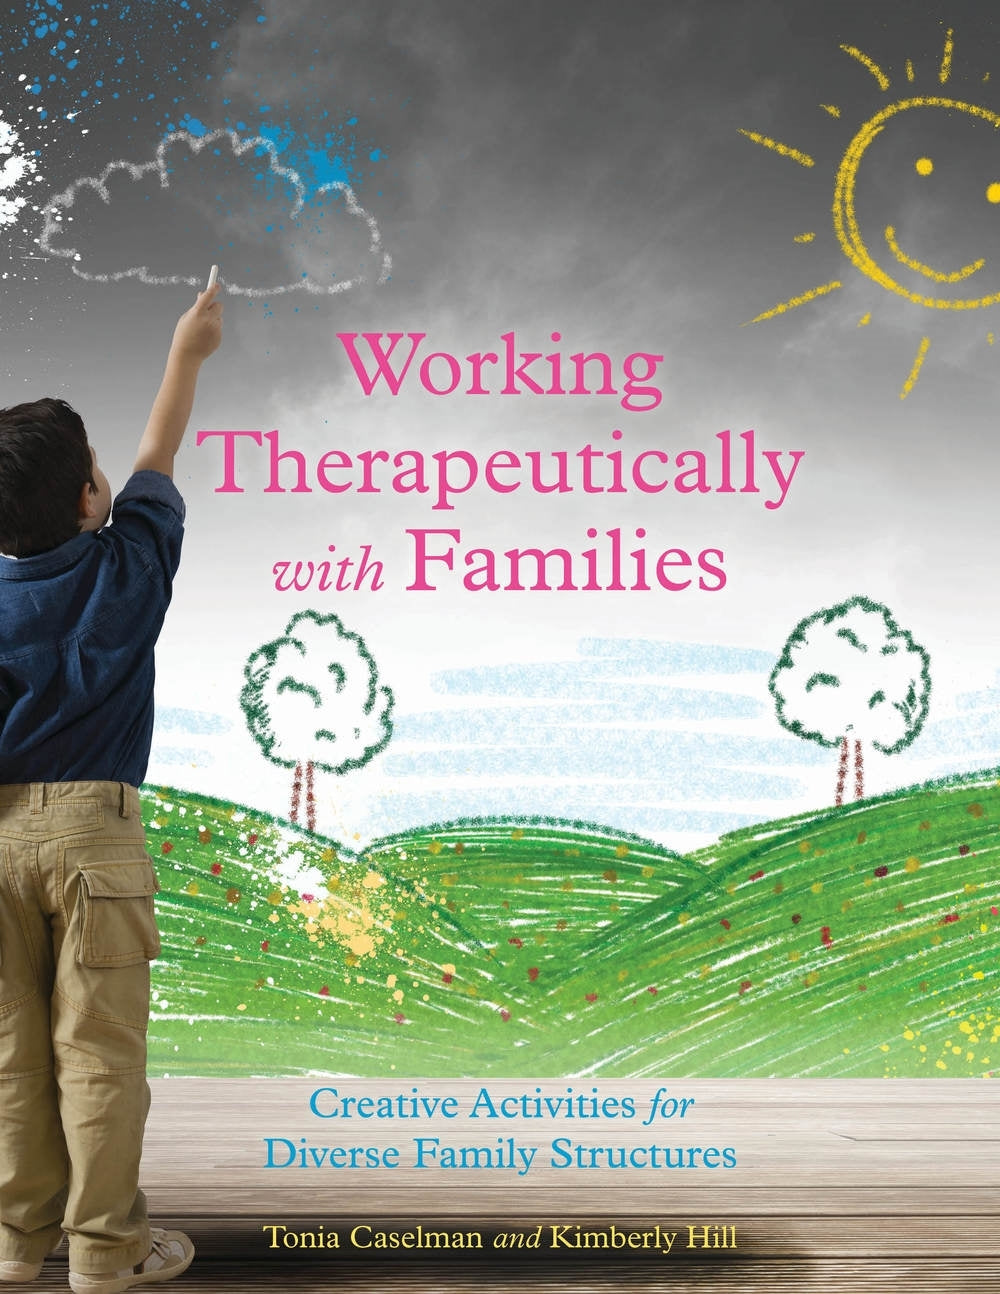 Working Therapeutically with Families by Tonia Caselman, Kimberly Hill